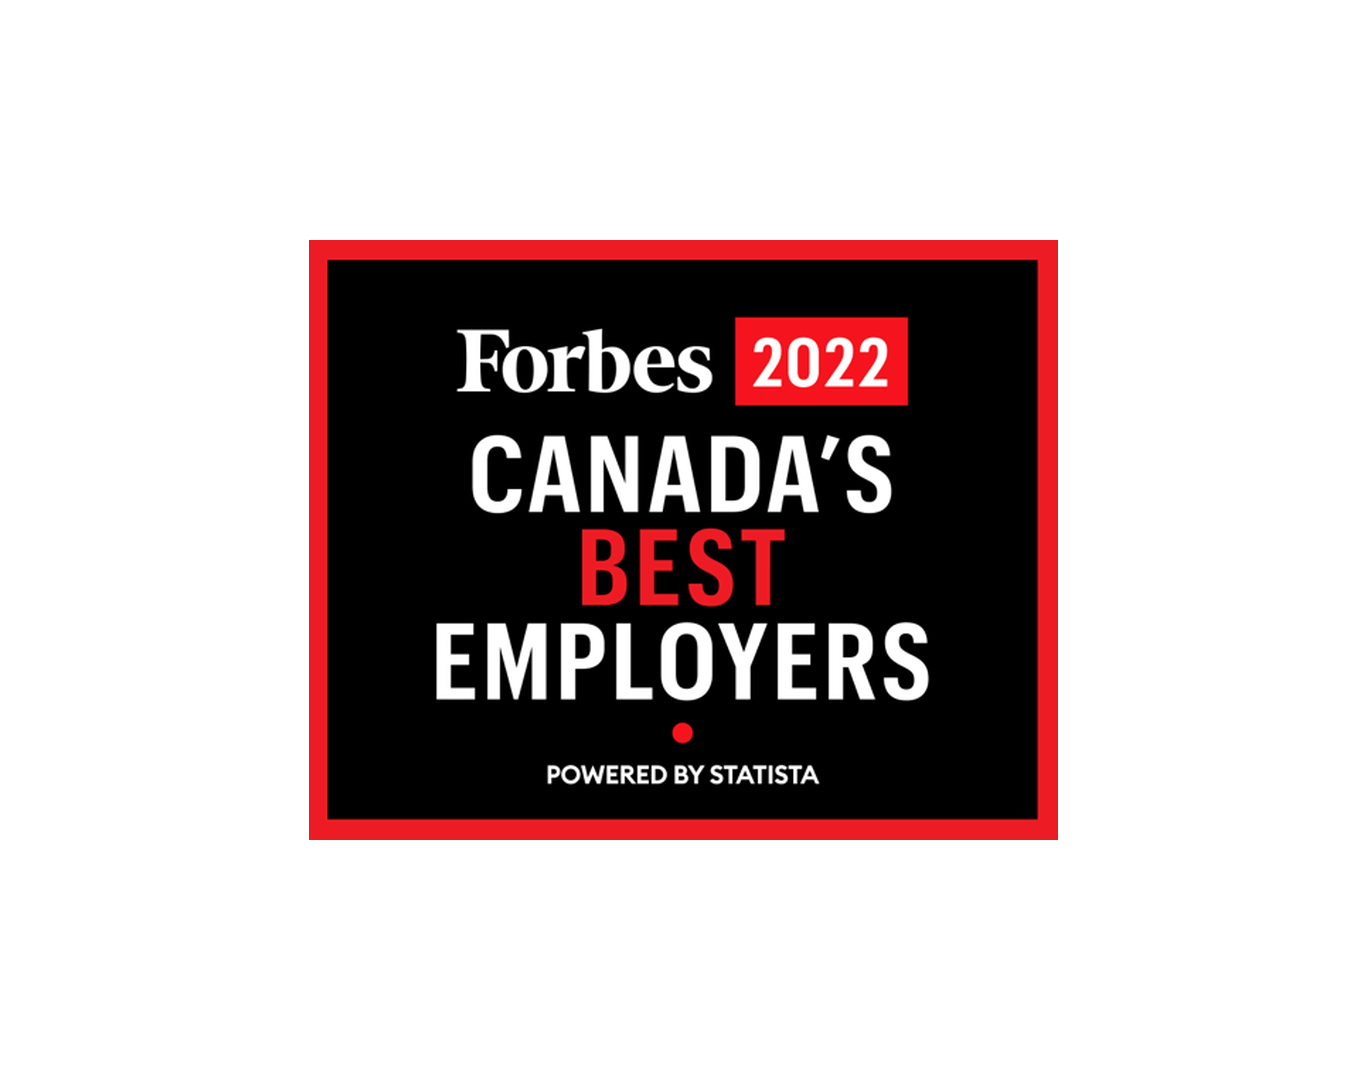 Canada’s Best Employers – Forbes 2022